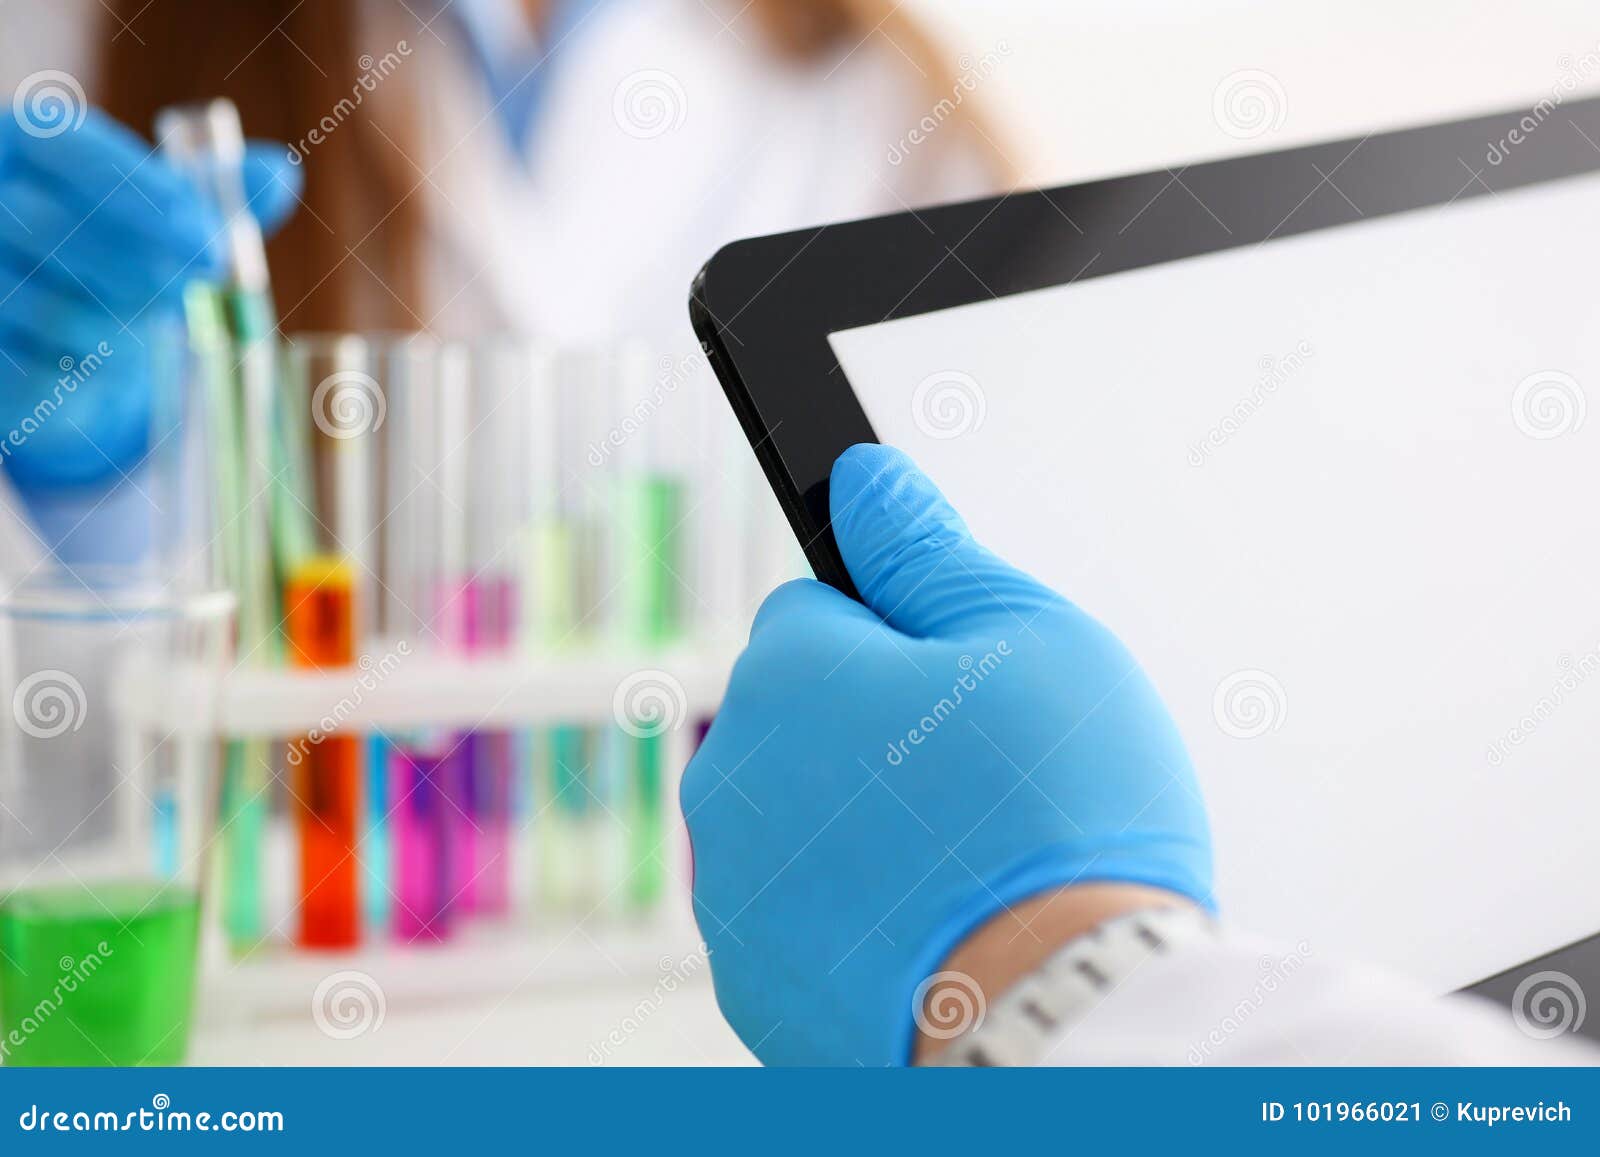 Male Technician Arms in Protective Gloves Hold Tablet Pc Stock Image ...